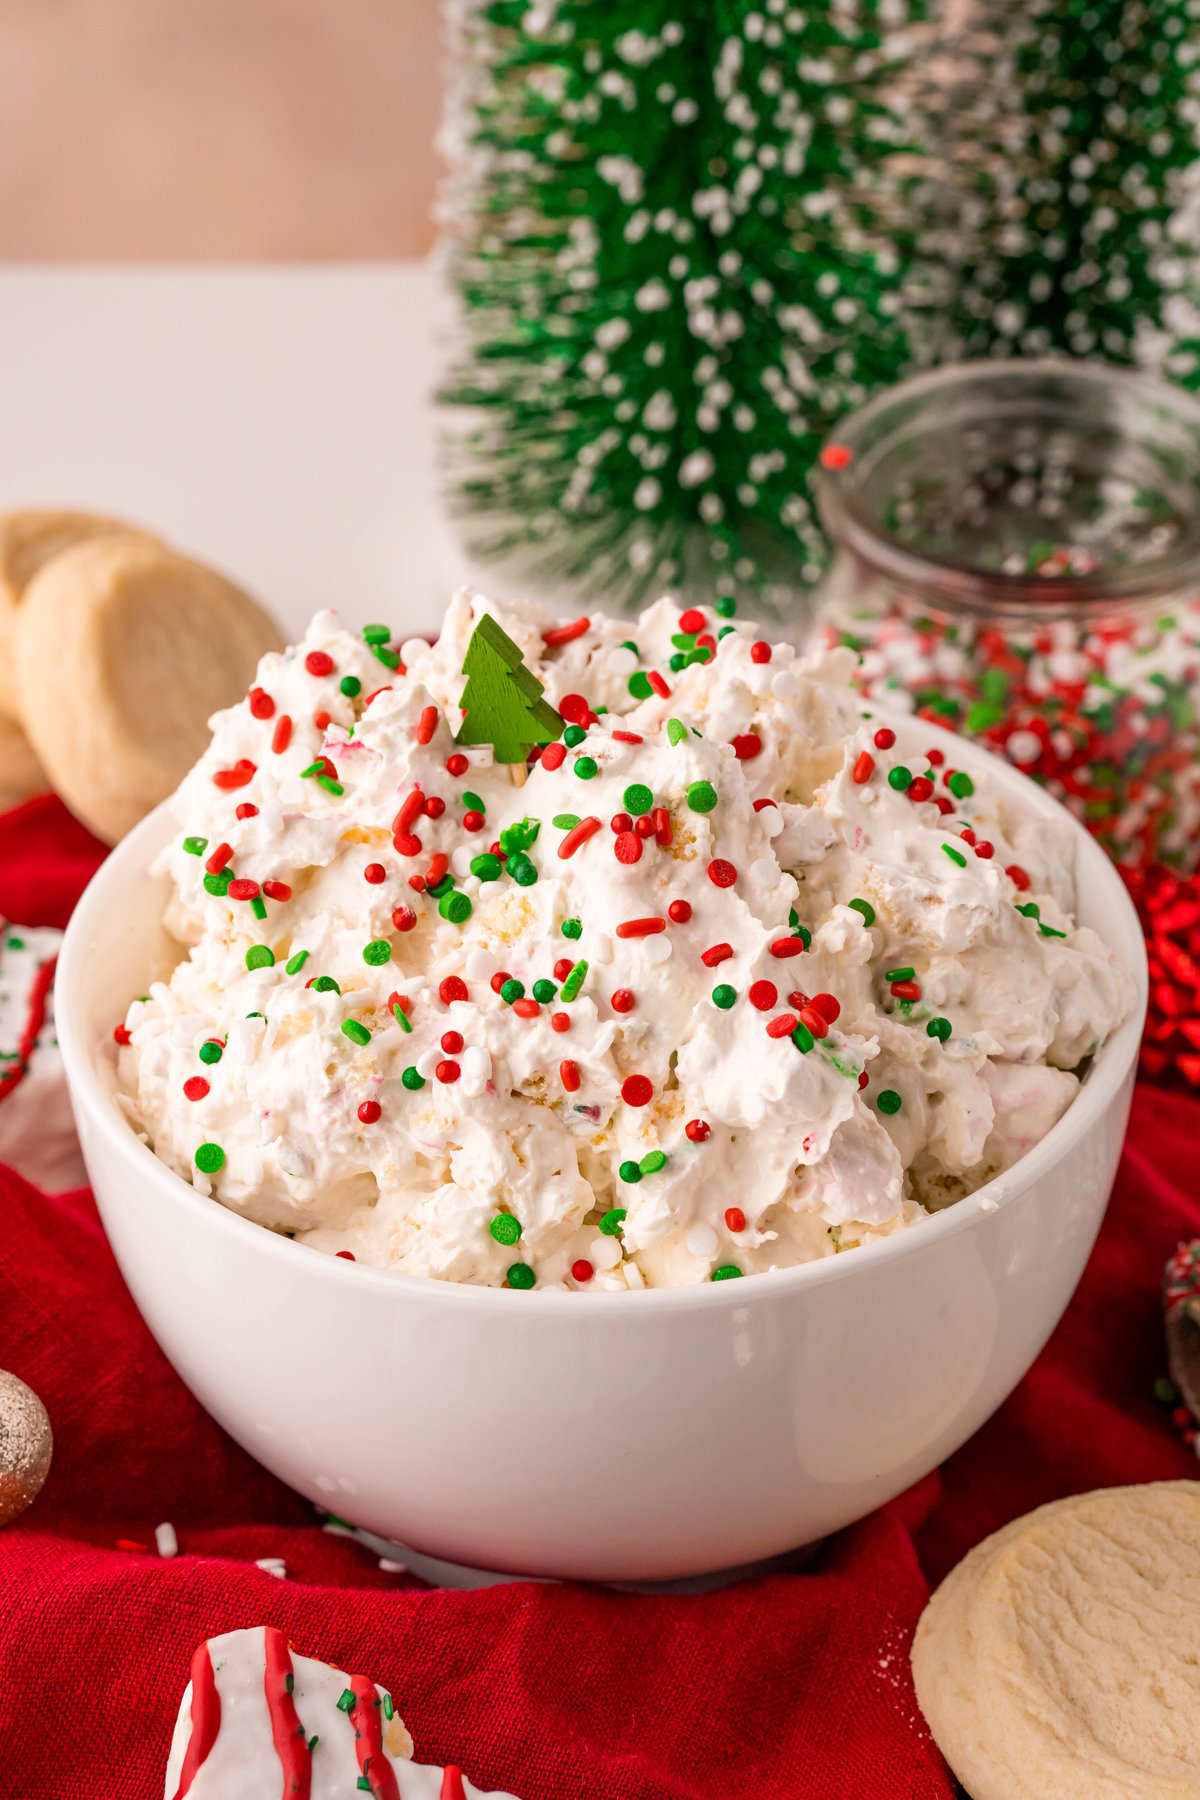 Christmas tree cake dip in a white bowl